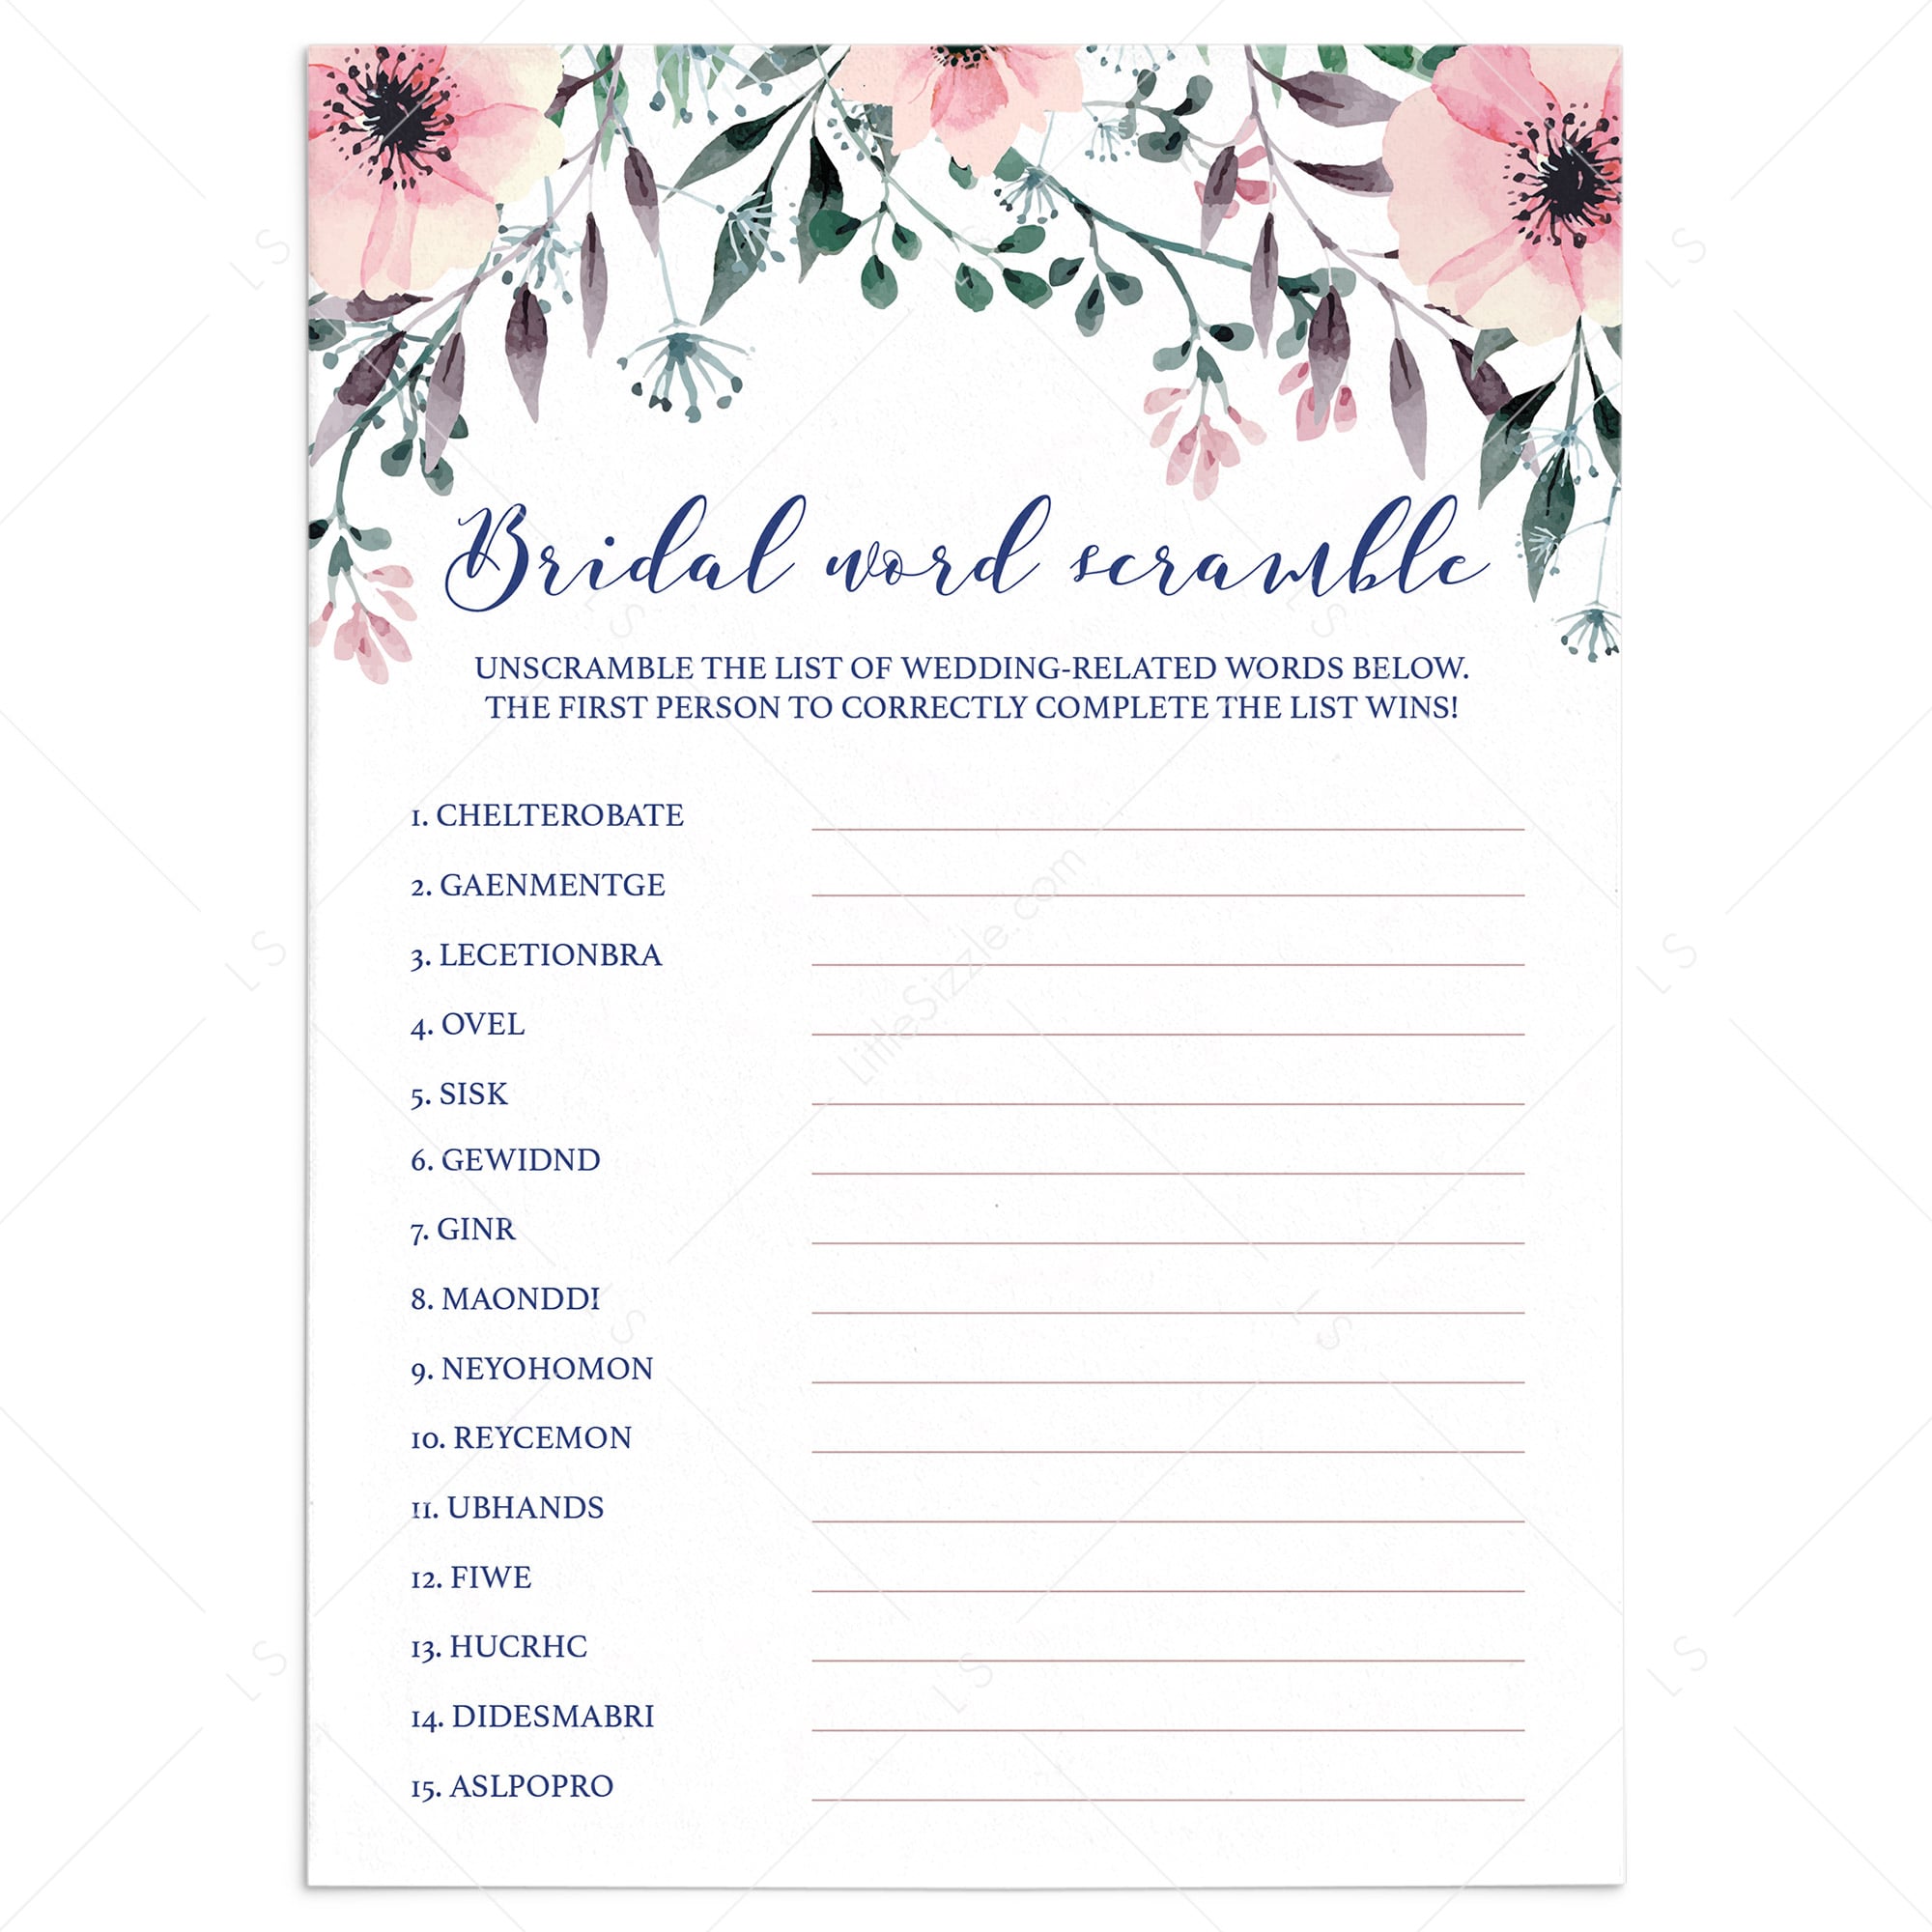 Printable Bridal Word Scramble Game Cards Floral by LittleSizzle